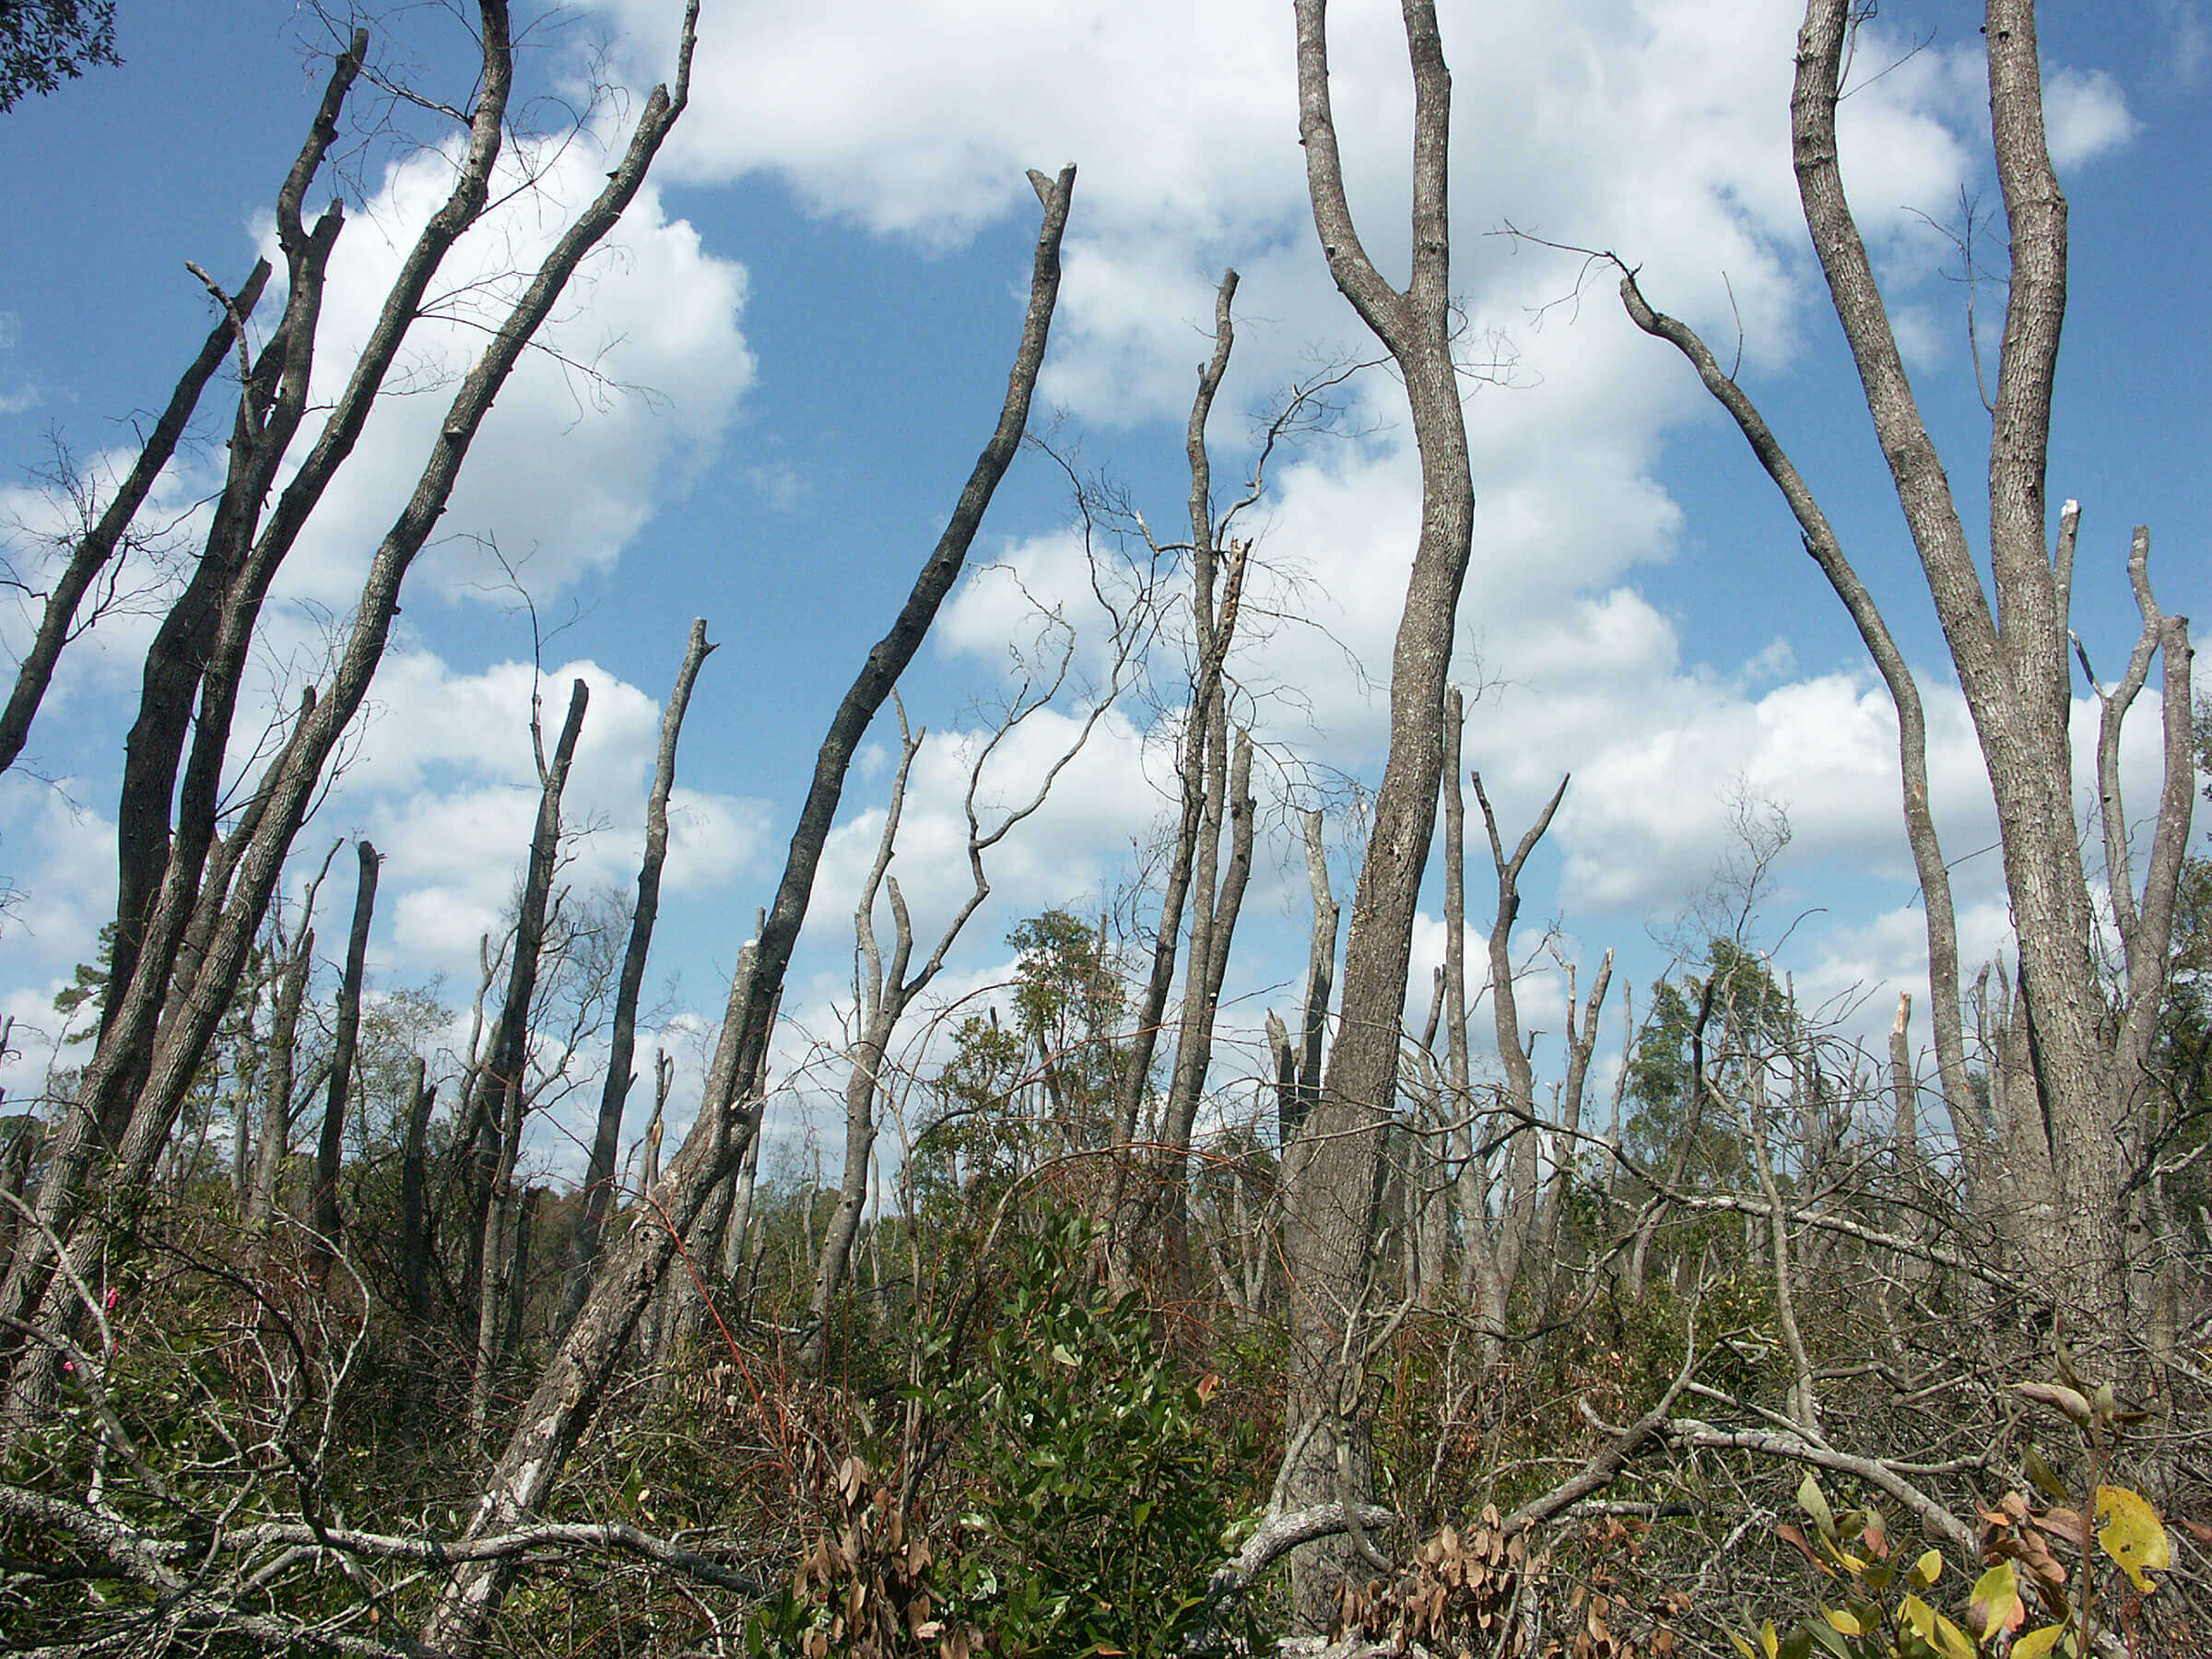 In Evans County, Georgia, laurel wilt disease has destroyed a stand of redbay laurel trees. (Image courtesy of Kevin Potter)